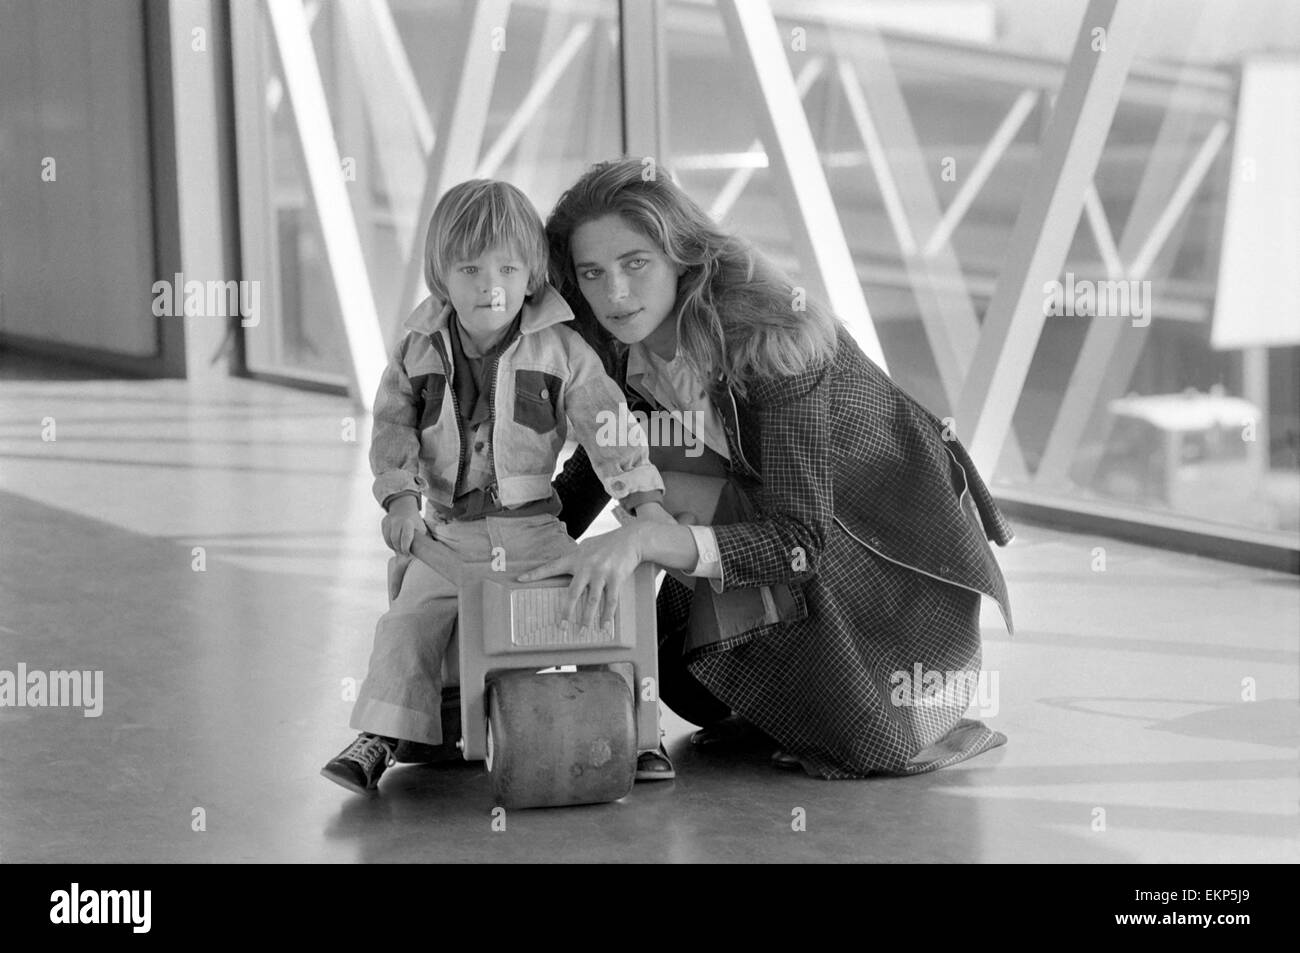 British actress Charlotte Rampling arrived at Heathrow Airport today and announced that her latest film 'The Night Porter' is 'hotter than 'Last Tango in Paris'. Charlotte Rampling with her son Barnaby at Heathrow Airport today. September 1974 74-5696-005 Stock Photo